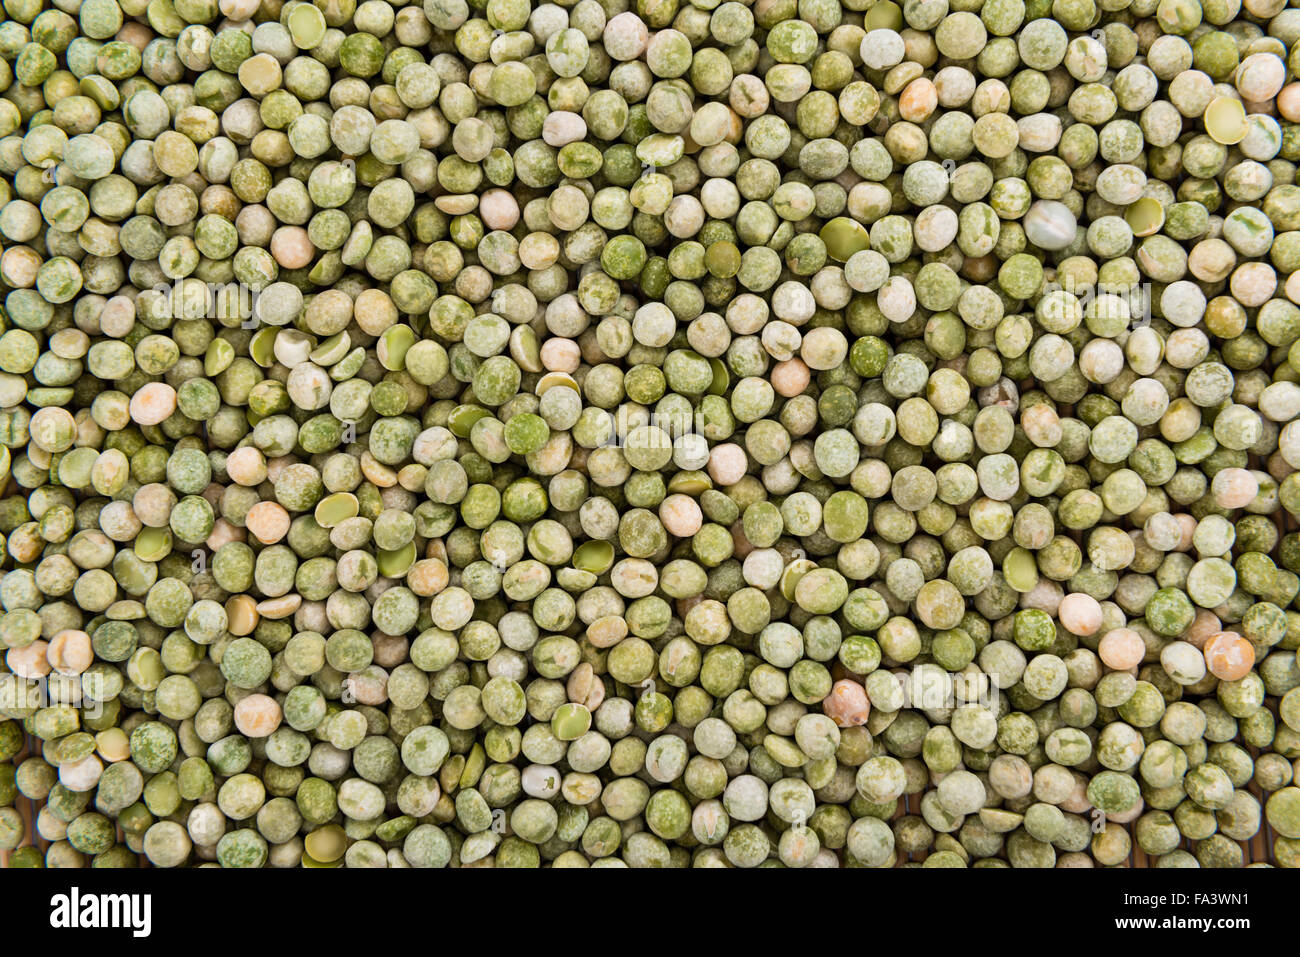 Dried green Peas (close-up shot) for use as background image or as texture Stock Photo